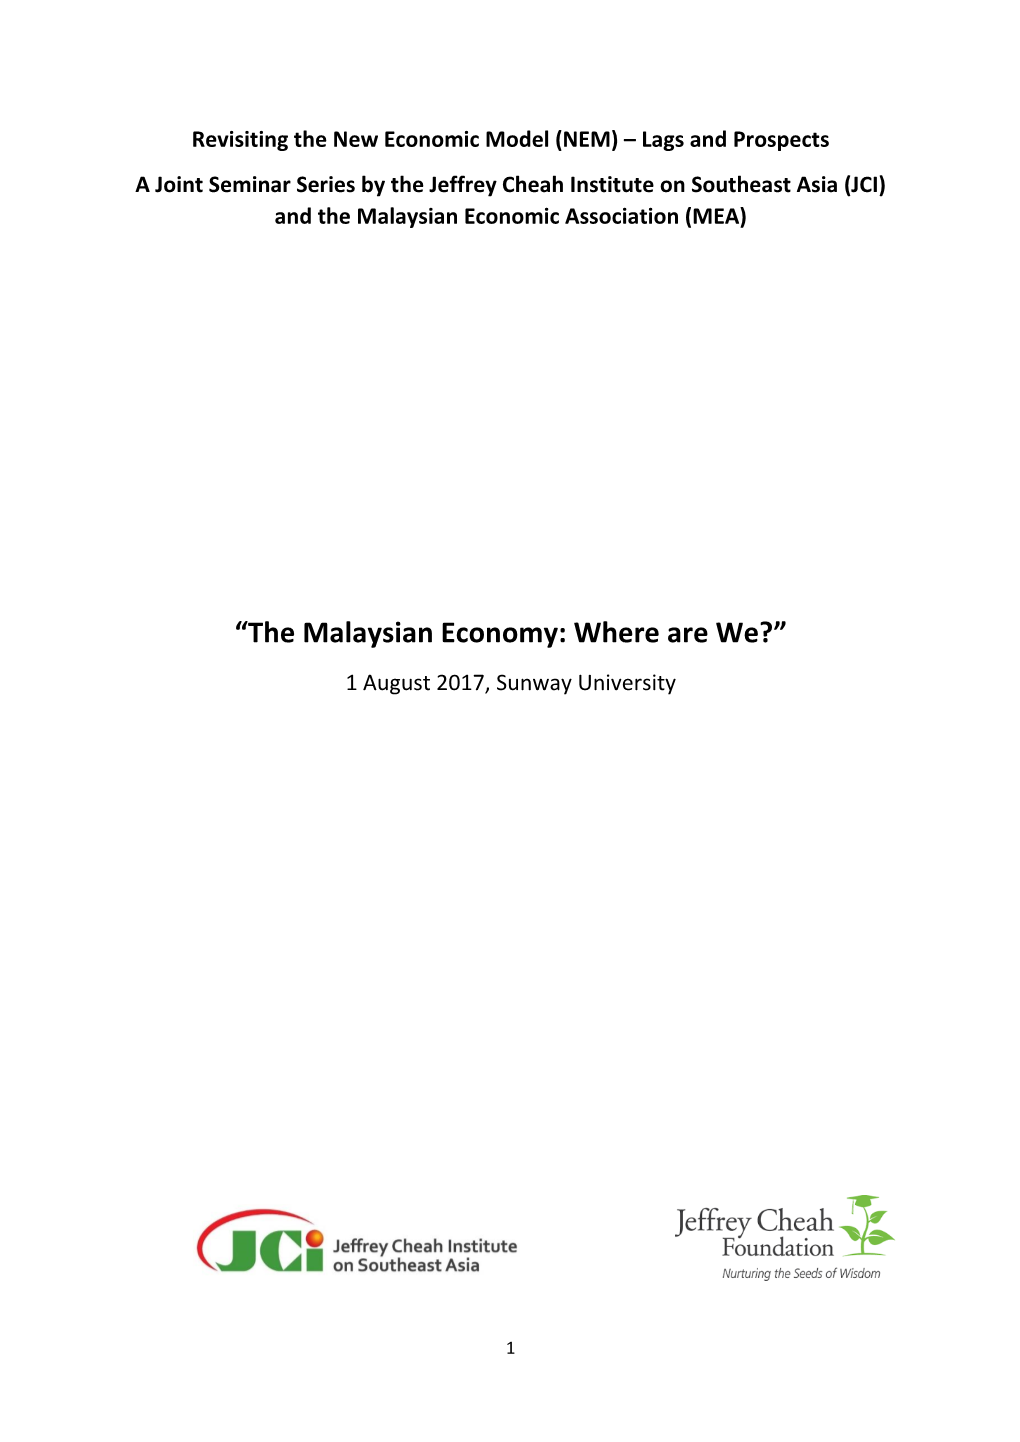 “The Malaysian Economy: Where Are We?” 1 August 2017, Sunway University